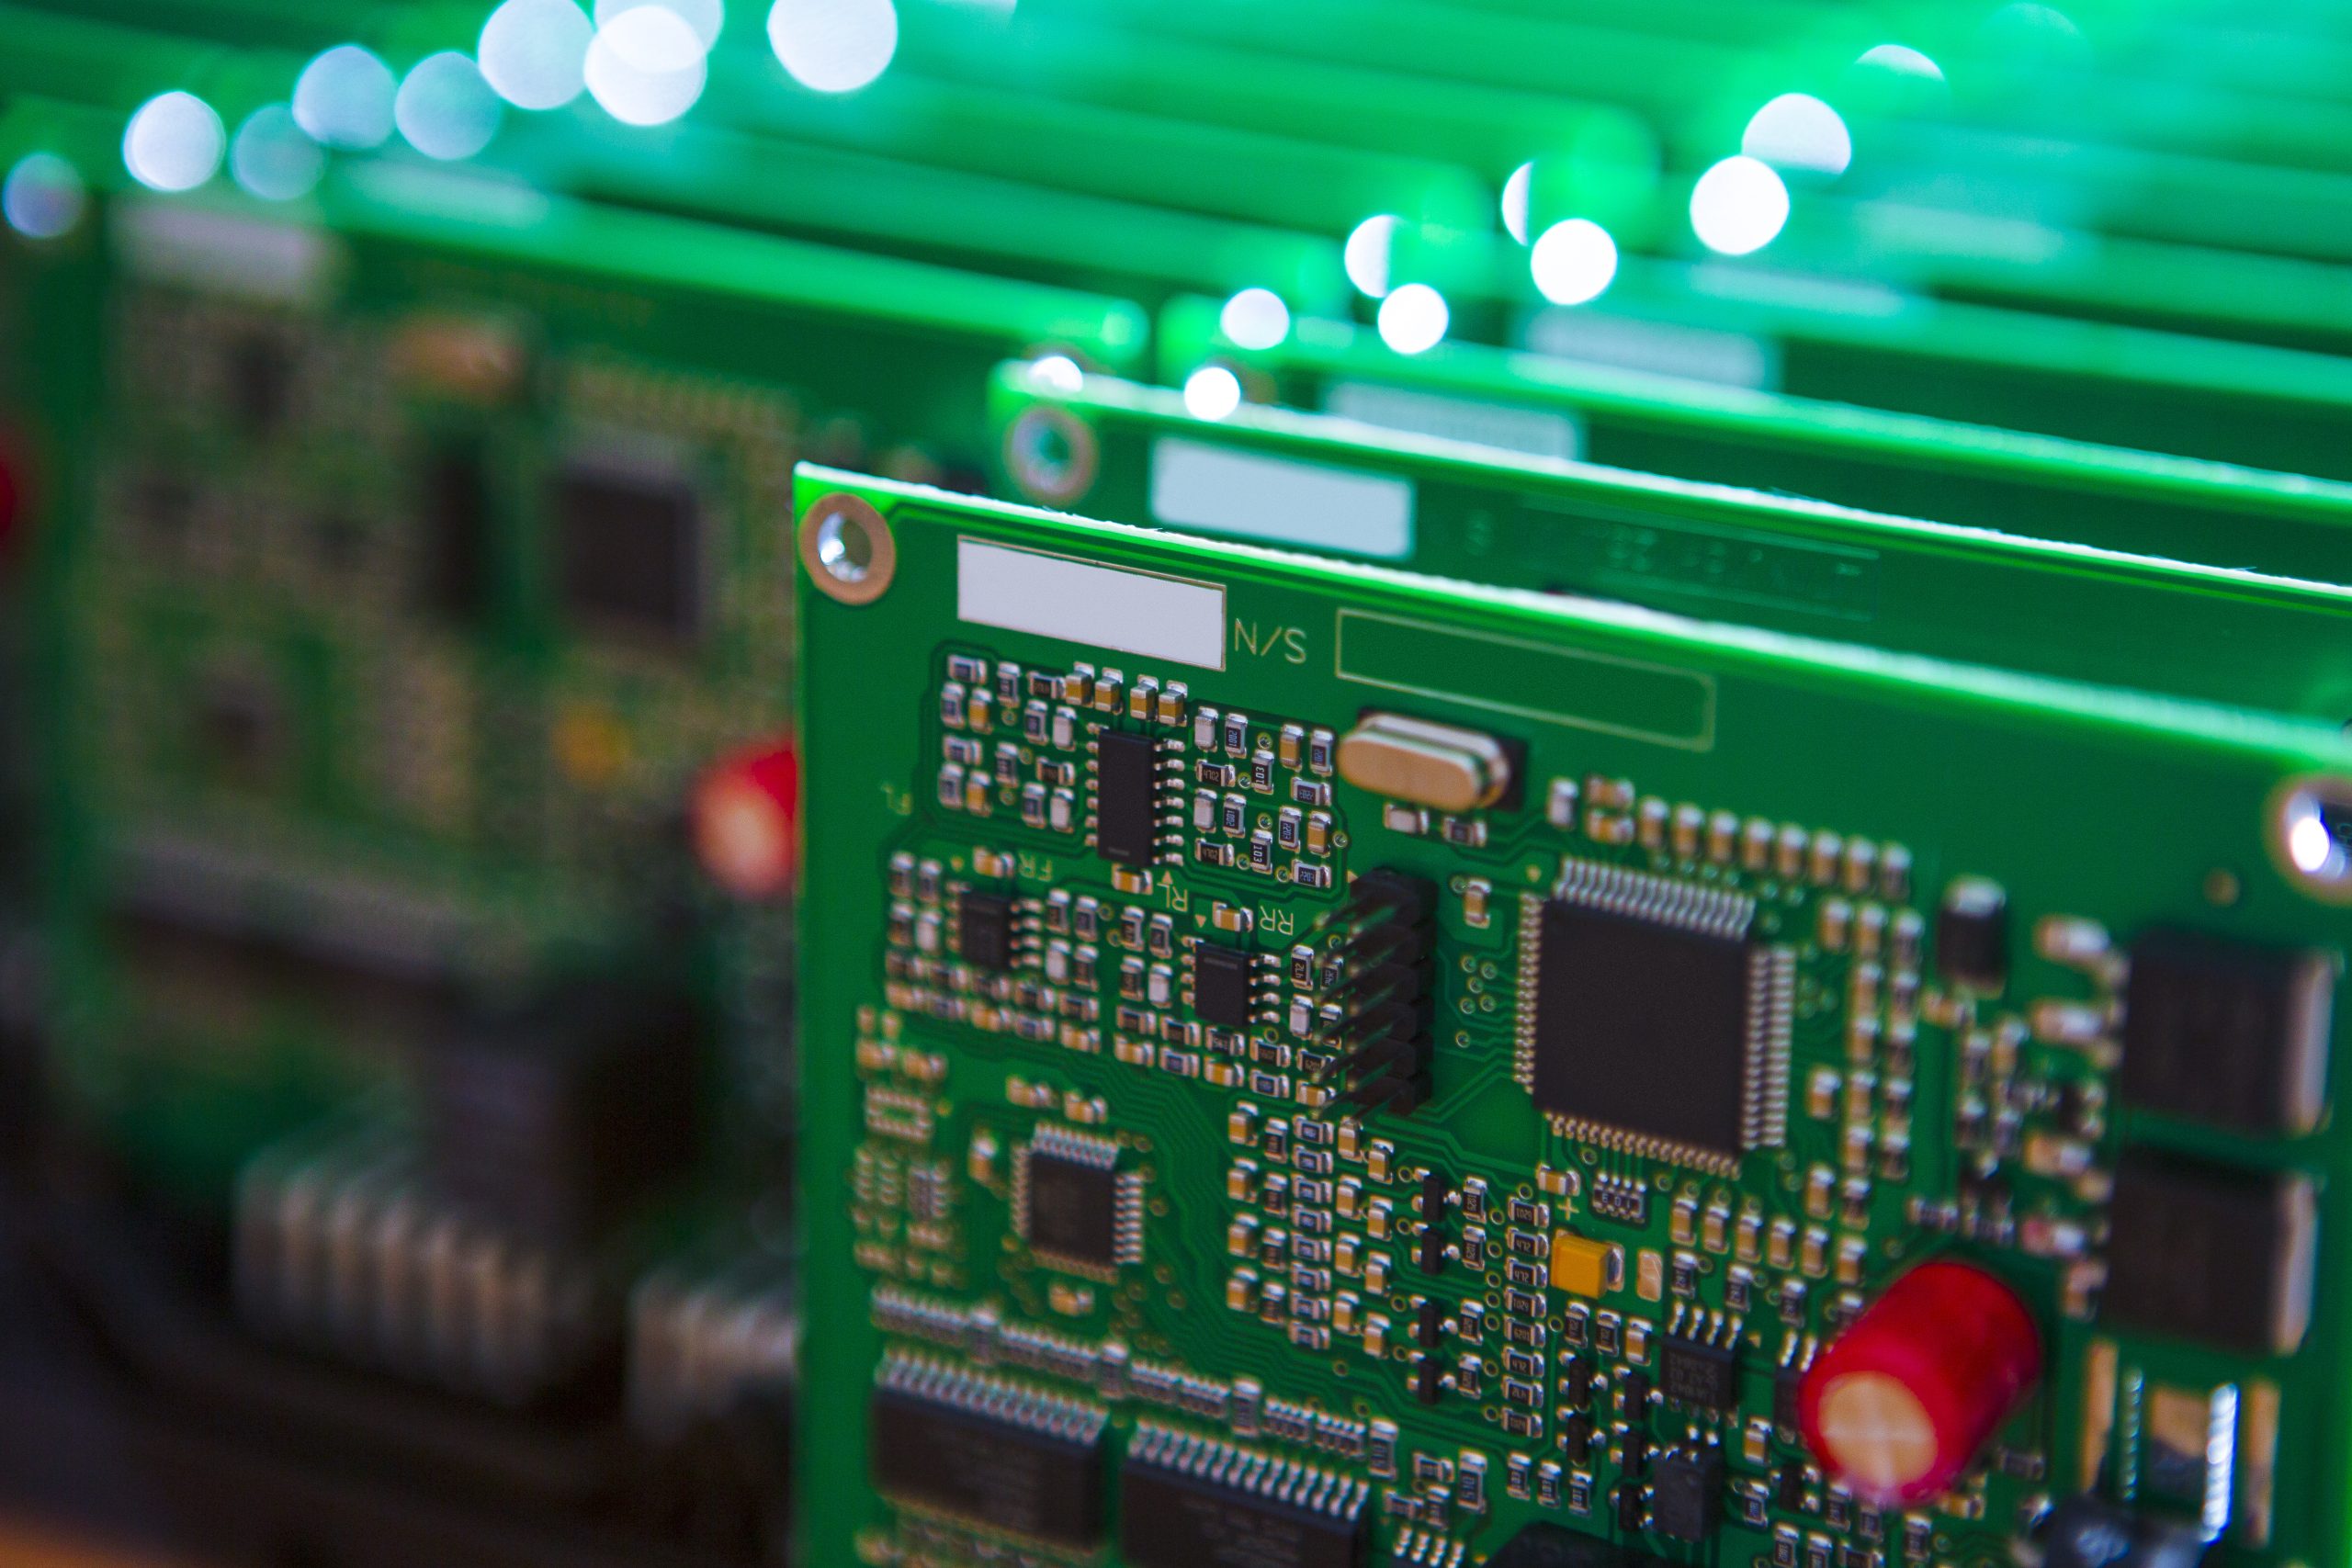 Modern Electronics Ideas. Closeup of Lot of Electronic Printed Circuit Boards with Lots of Surface Mounted Components.